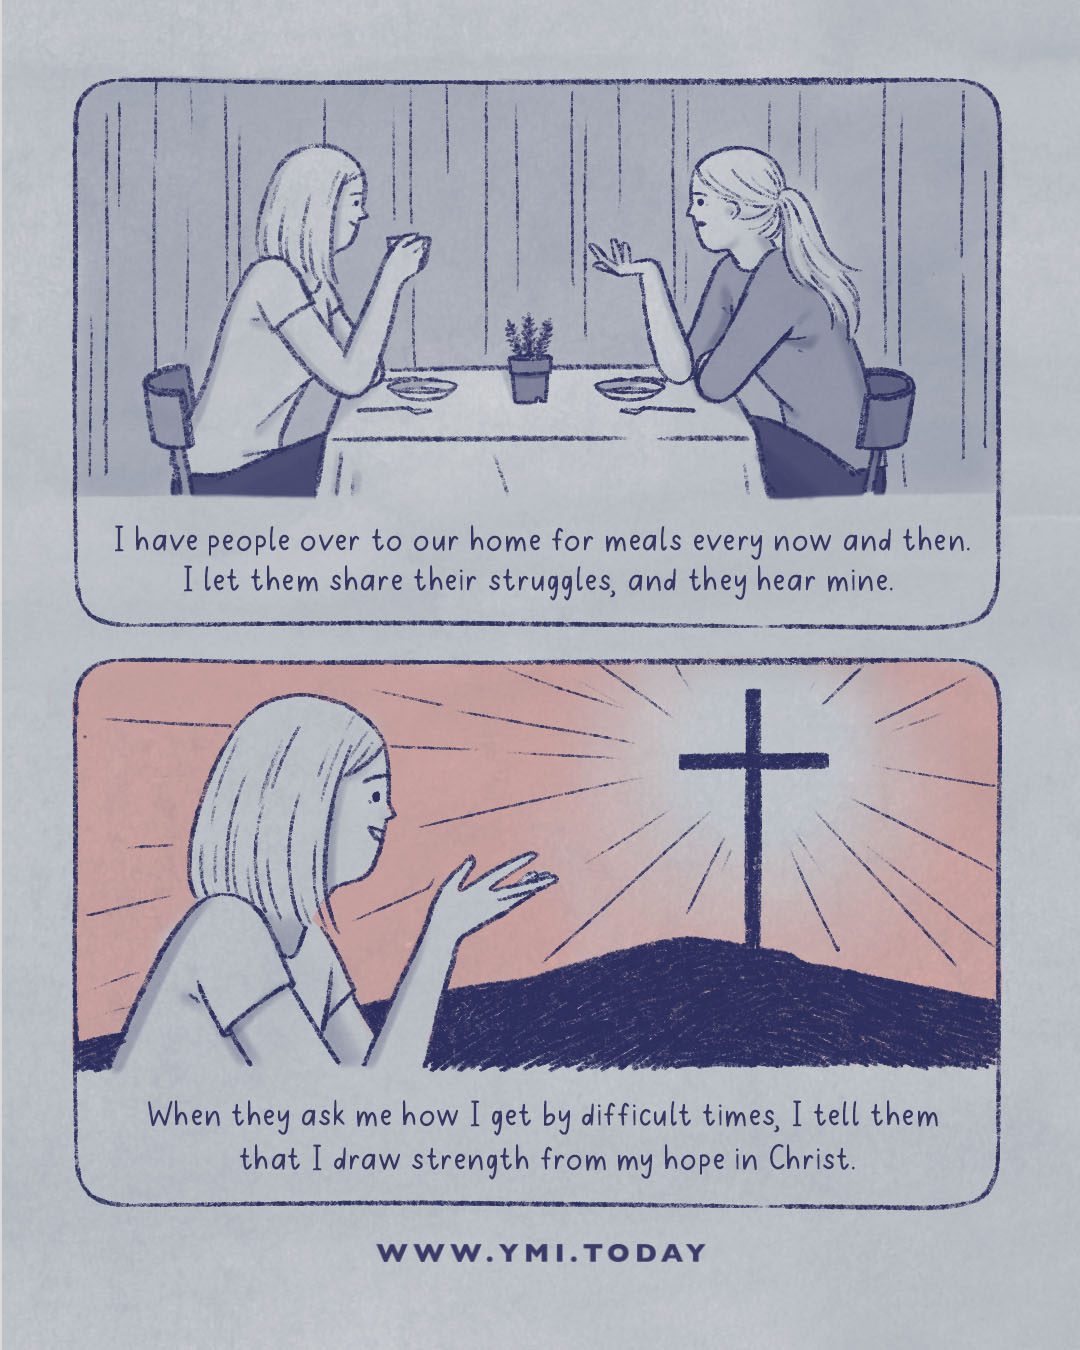 2 panel comic: Woman listening to her non-Christian friend's struggles, and women telling her that her strength is from her hope on Jesus (showing the cross)